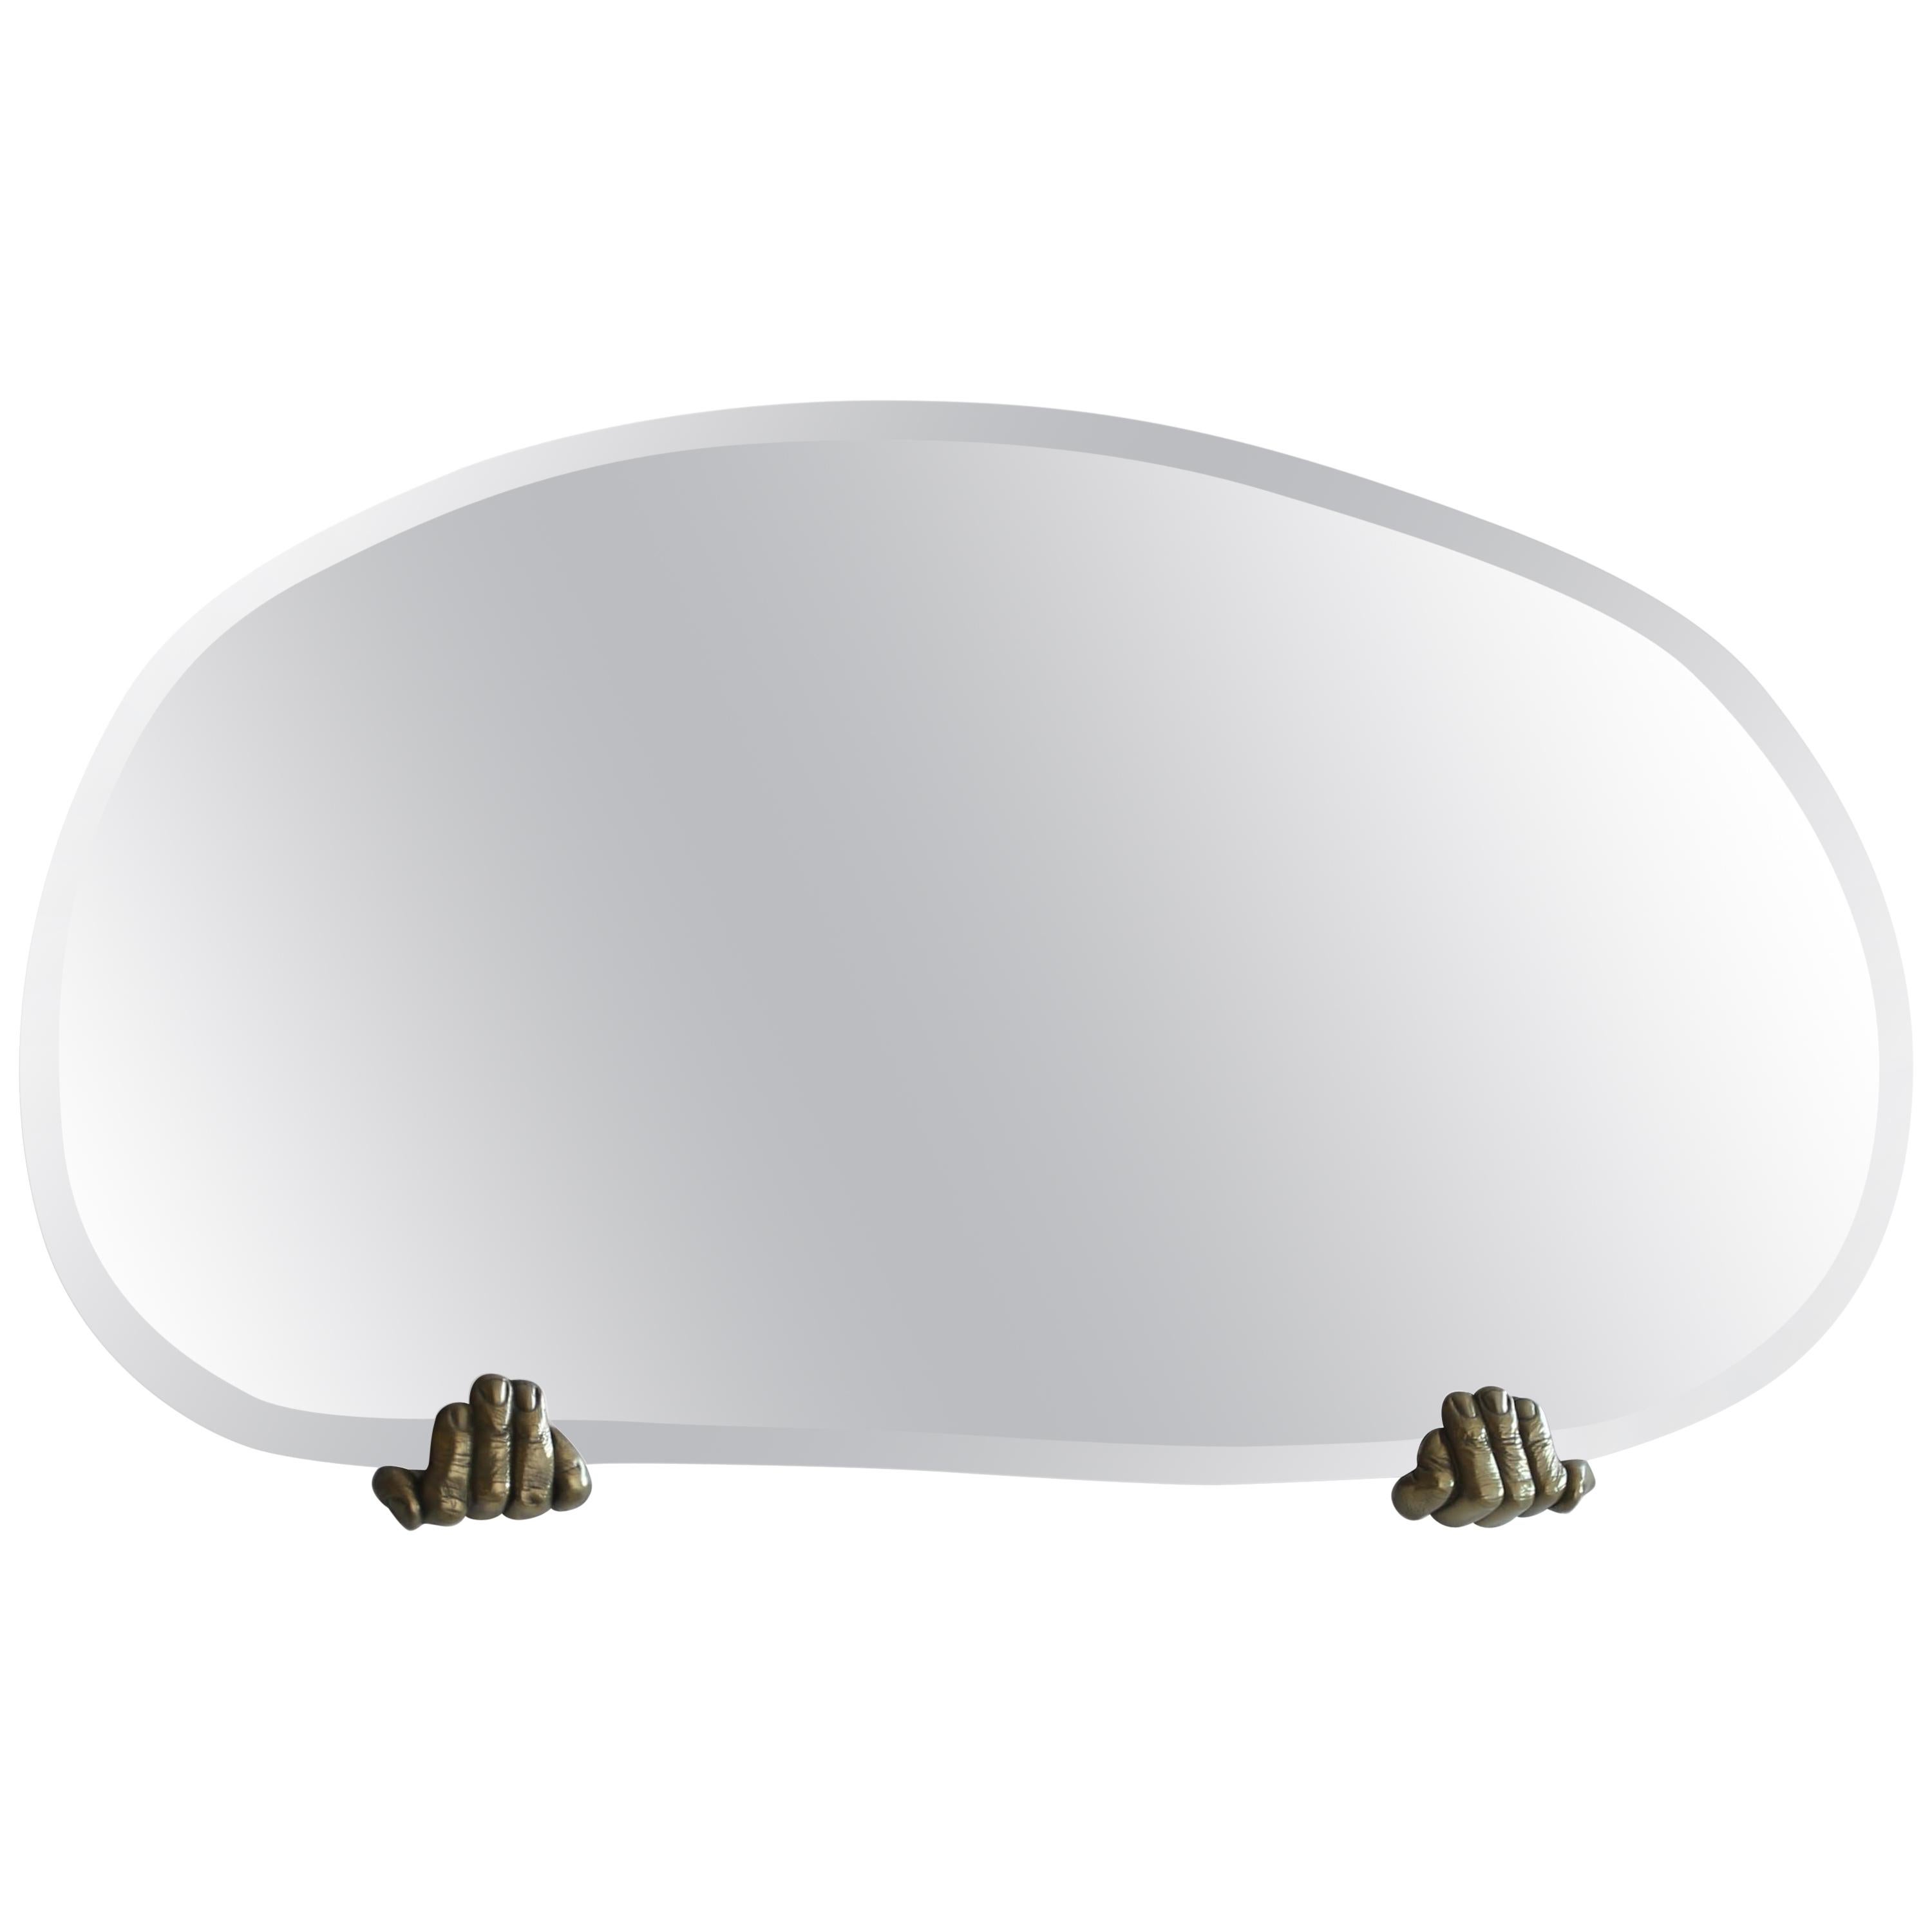 Dal Furlo "Handle Wallmirror" Stainless Steel and Brass Wall Mirror For Sale